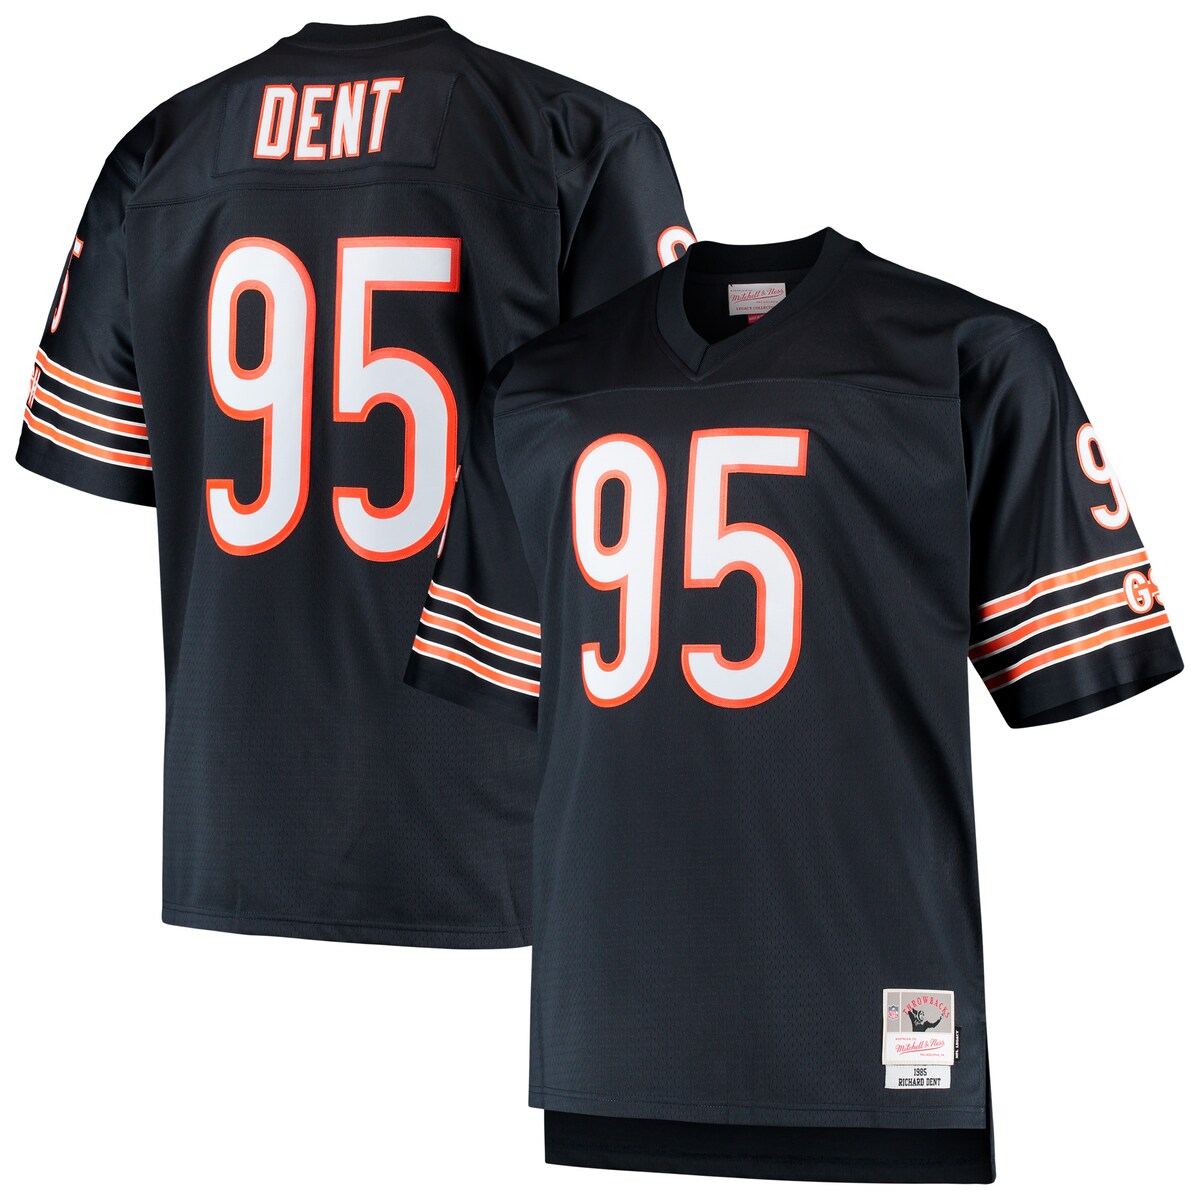 Showcase who your all-time favorite Chicago Bears is by sporting this Richard Dent 1985 Retired Player Replica jersey from Mitchell & Ness. It features authentic Chicago Bears graphics that will leave a lasting impression on fellow fans. You'll remind everyone around you of the legendary Richard Dent.Officially licensedShort sleeveReplica JerseyMaterial: 100% PolyesterV-neckMachine wash, tumble dry lowImportedStitched tackle twill letters and numbersDroptail hem with side splitsMesh fabricBrand: Mitchell & NessStitched fabric applique with player year and nameStitched jock tag at bottom left hemBack neck taping - no irritating stitch on the back neck